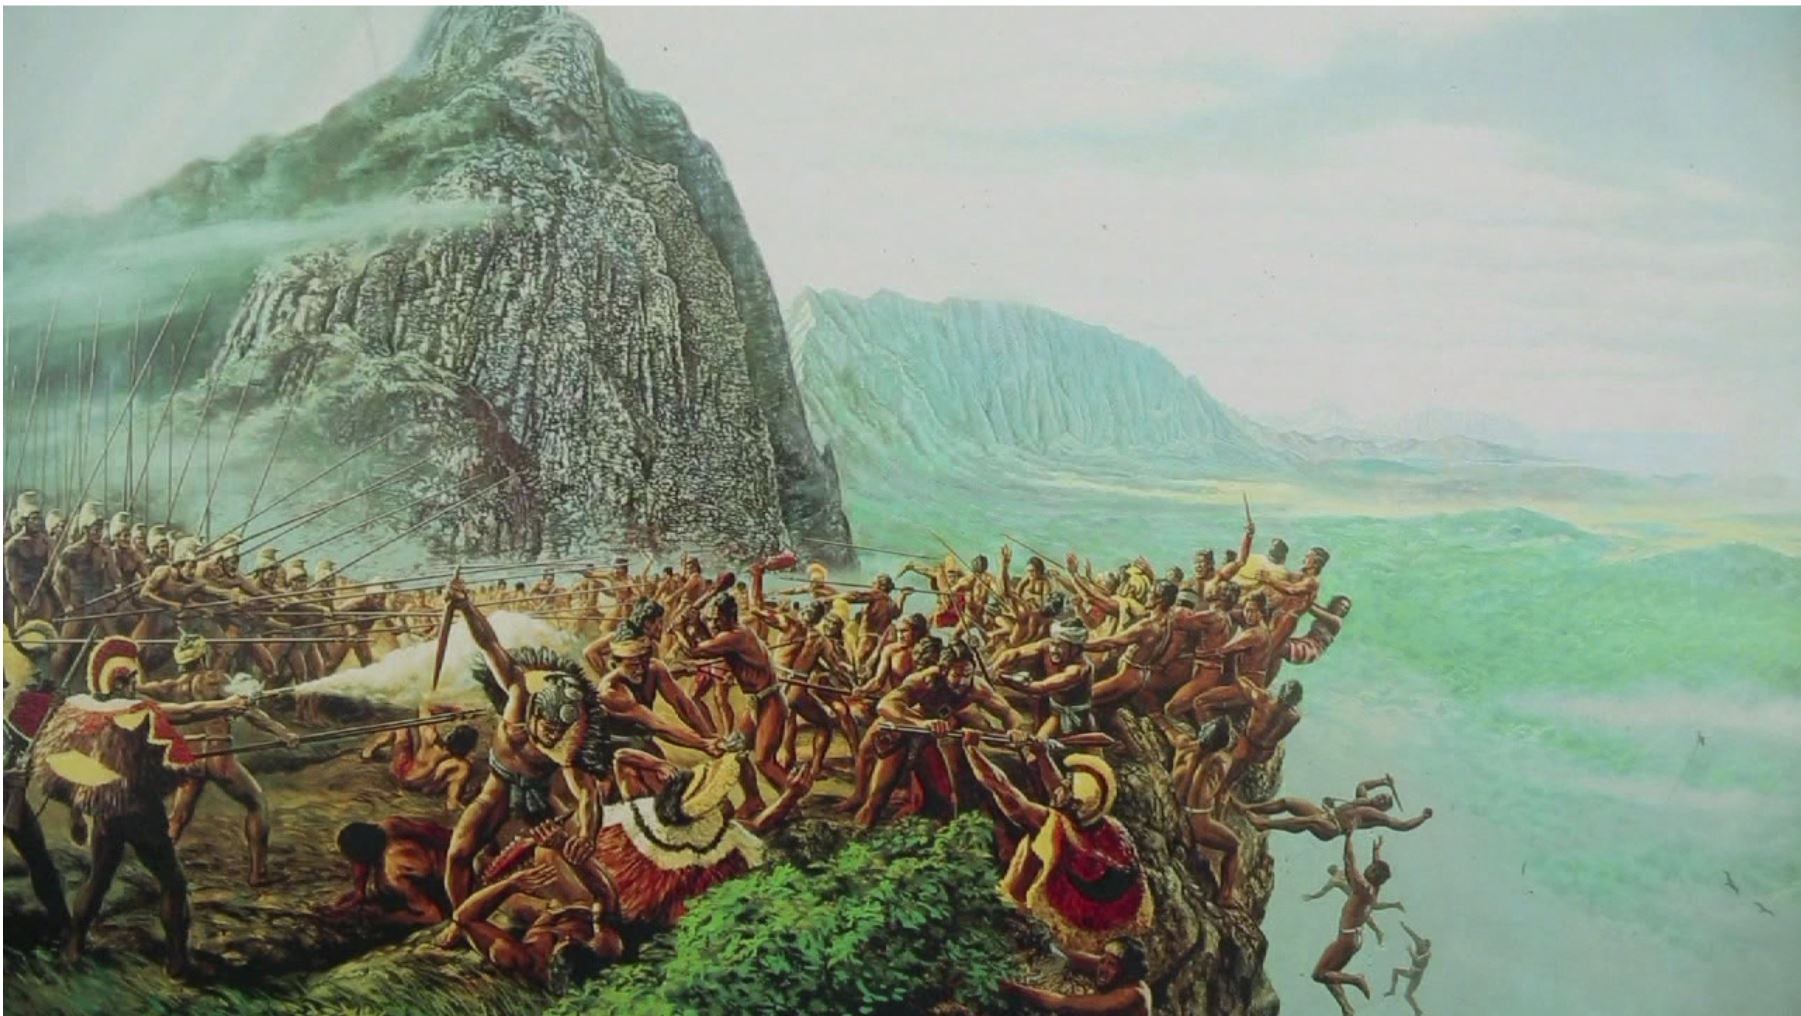 Painting depicting the battle of Nuuanu as it comes to it's conclusion along the Pali Lookout on the island of Oahu where Kamehameha's army overpowers the army of King Kalanikupele and literally pushes them over the edge to their deaths.